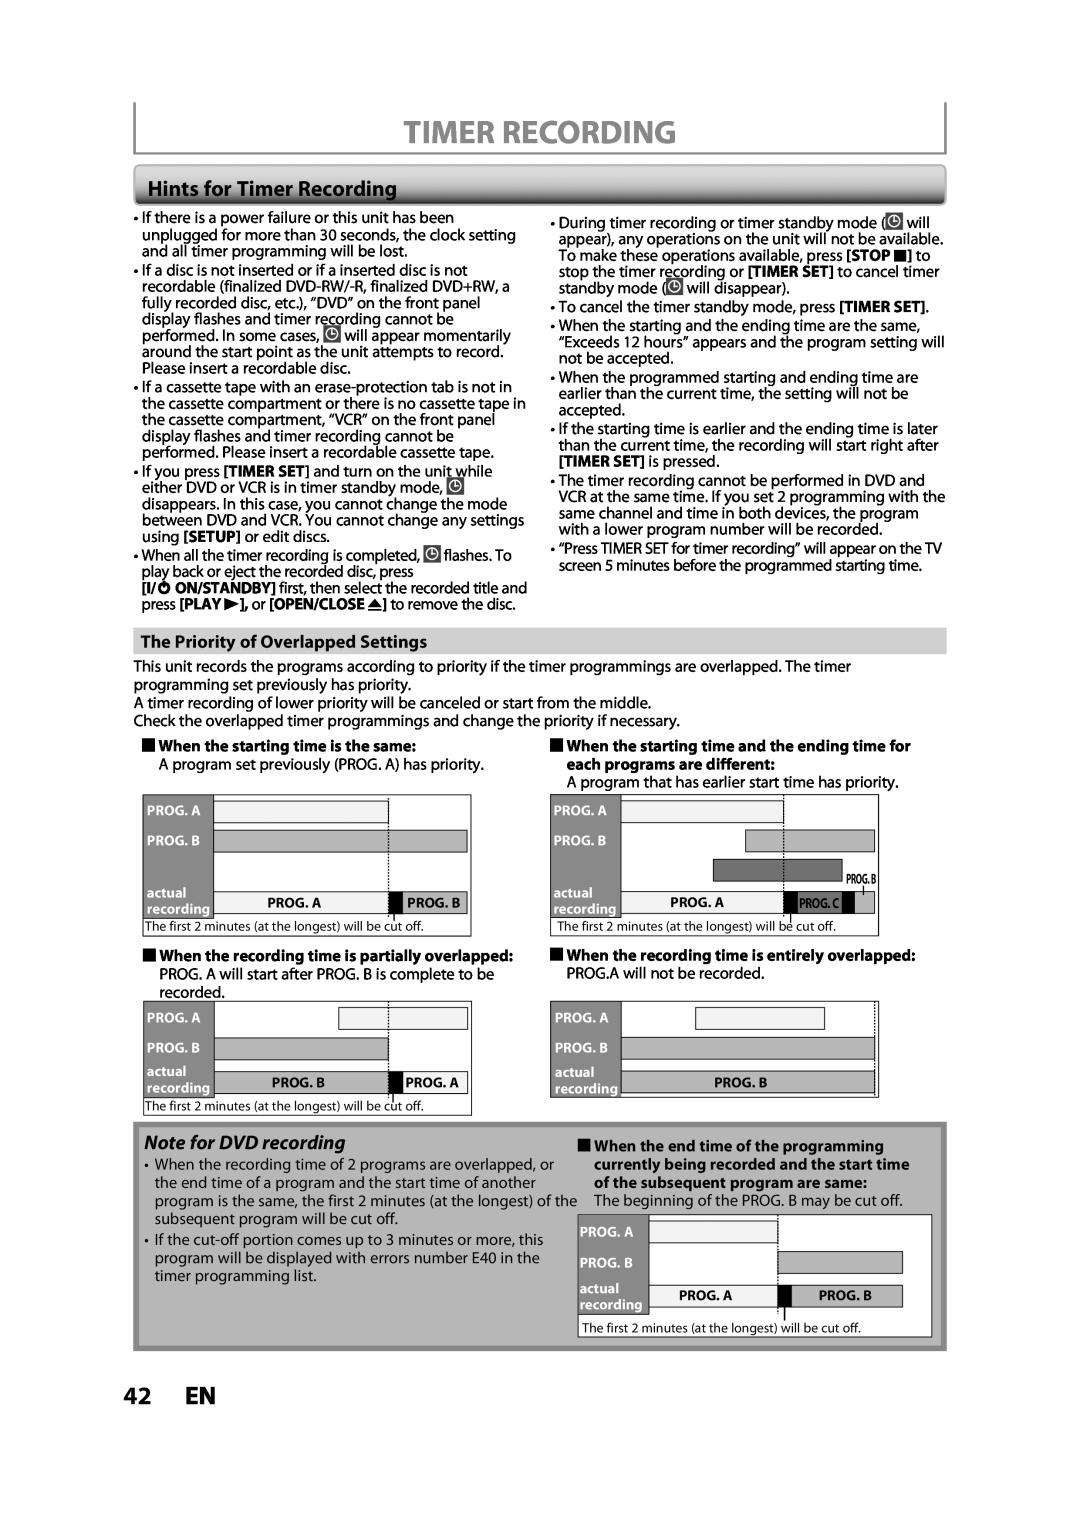 Toshiba DVR620KC owner manual 42 EN, Hints for Timer Recording, Note for DVD recording, The Priority of Overlapped Settings 